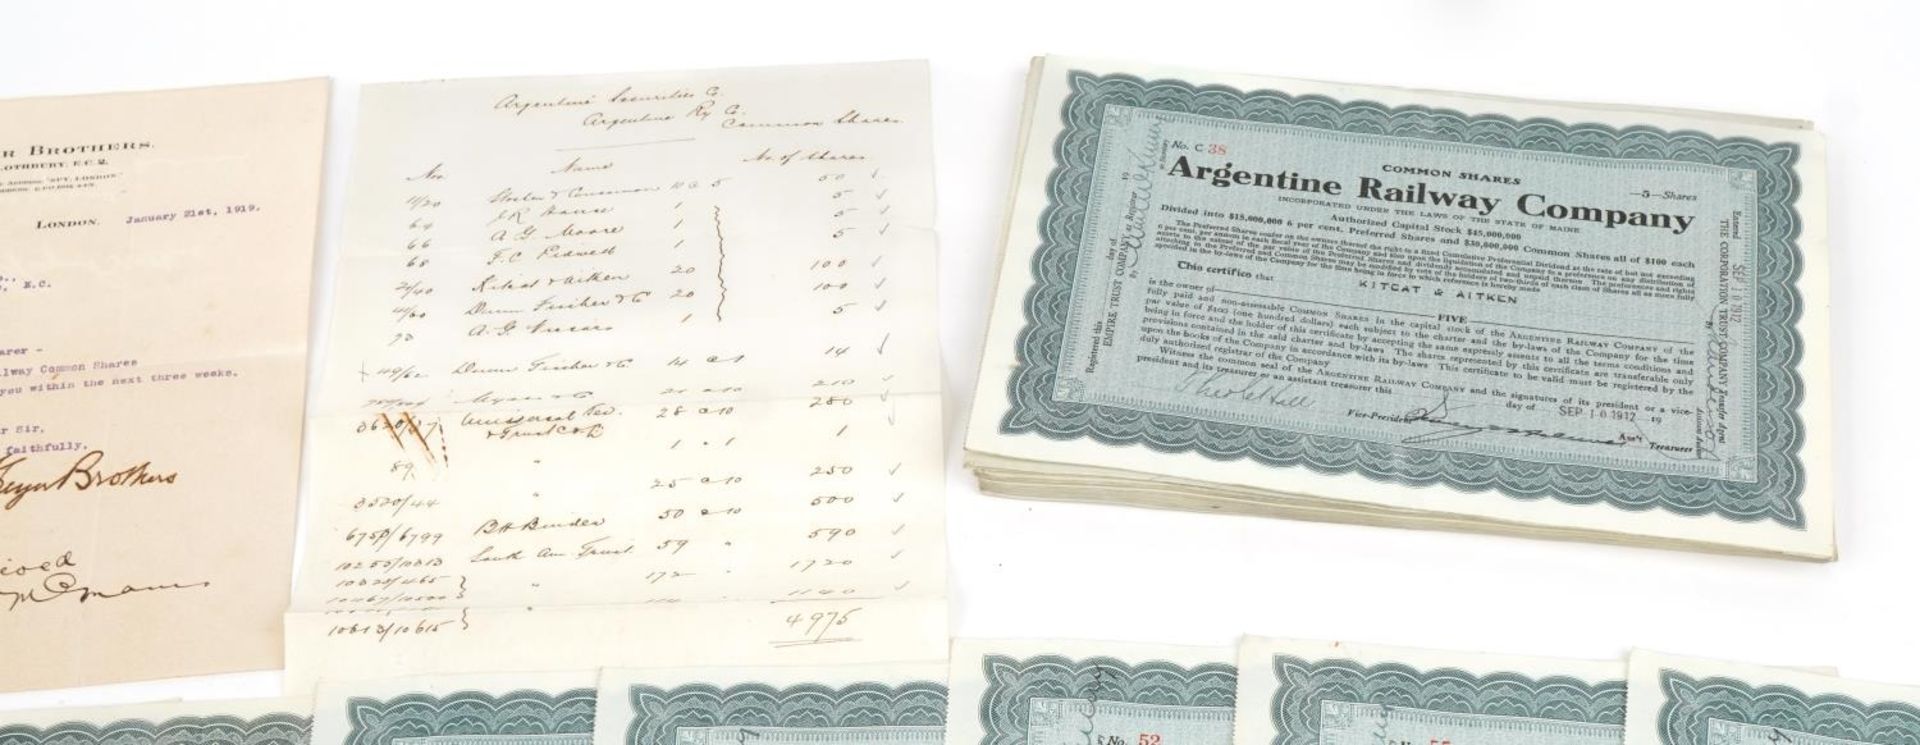 Extensive collection of early 20th century Argentine Railway Company share certificates - Bild 3 aus 6